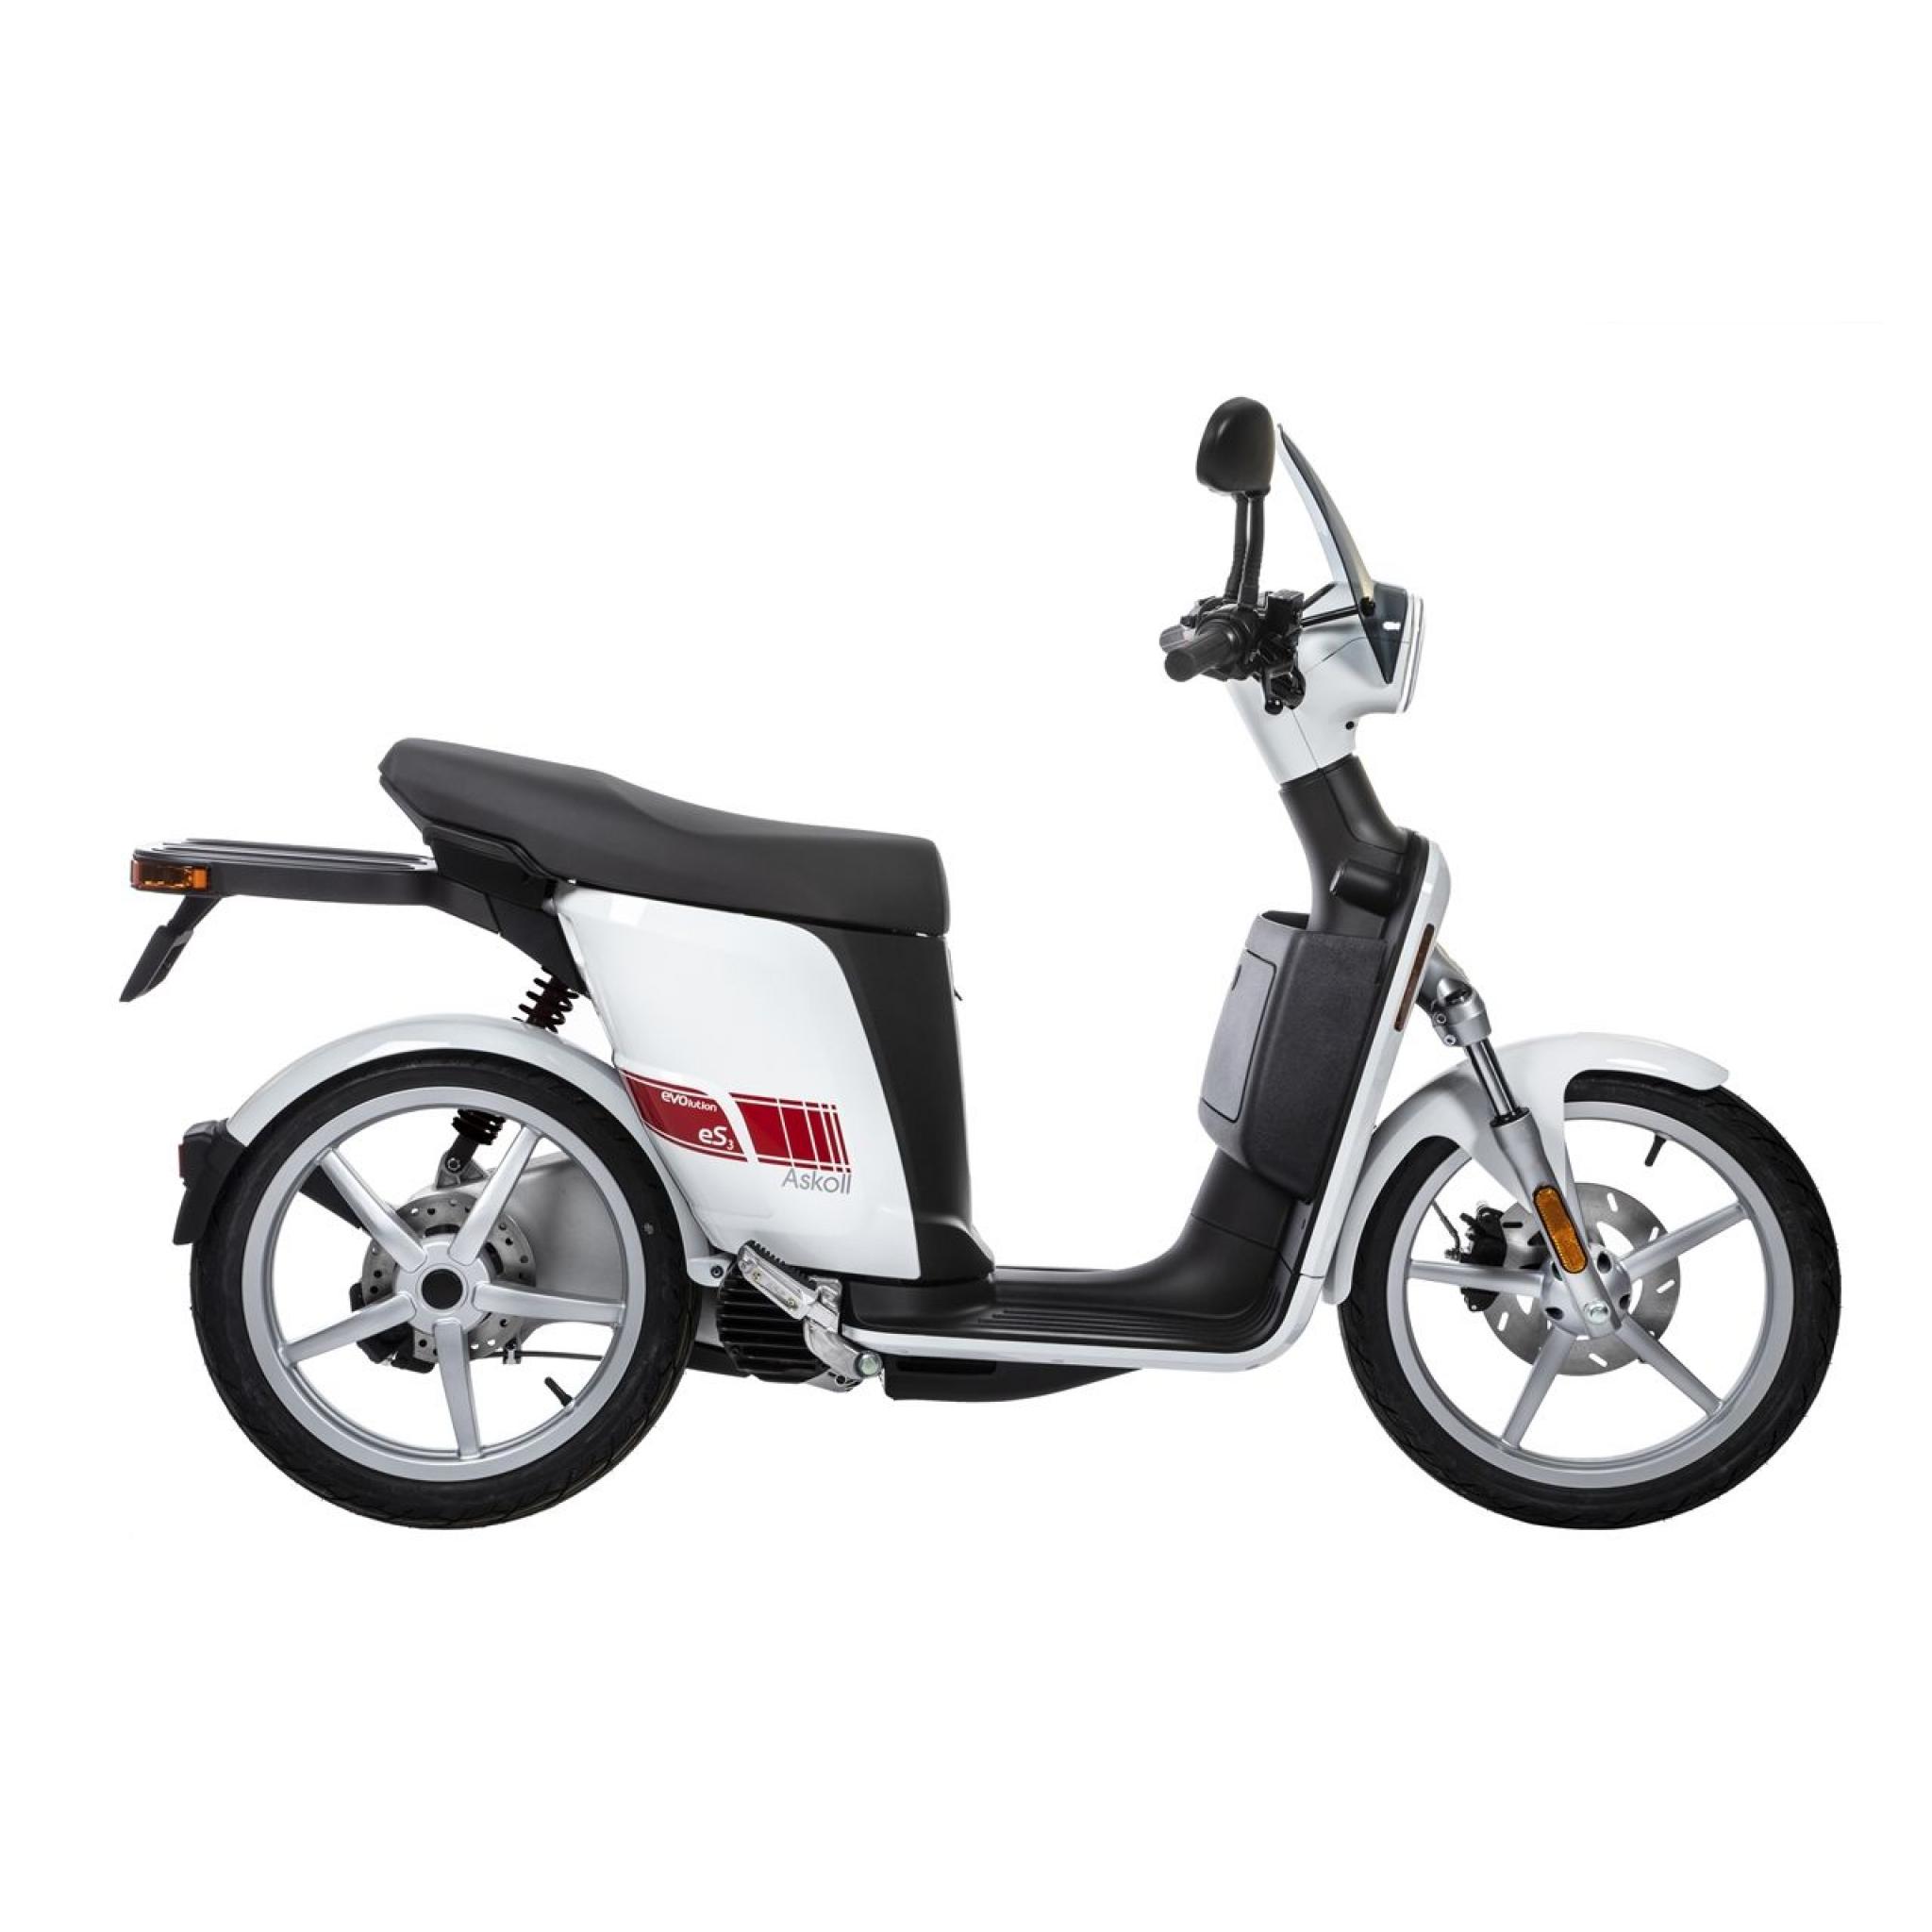 Askoll ES3 Evolution Electric Moped 3kw 45mph 45 Miles